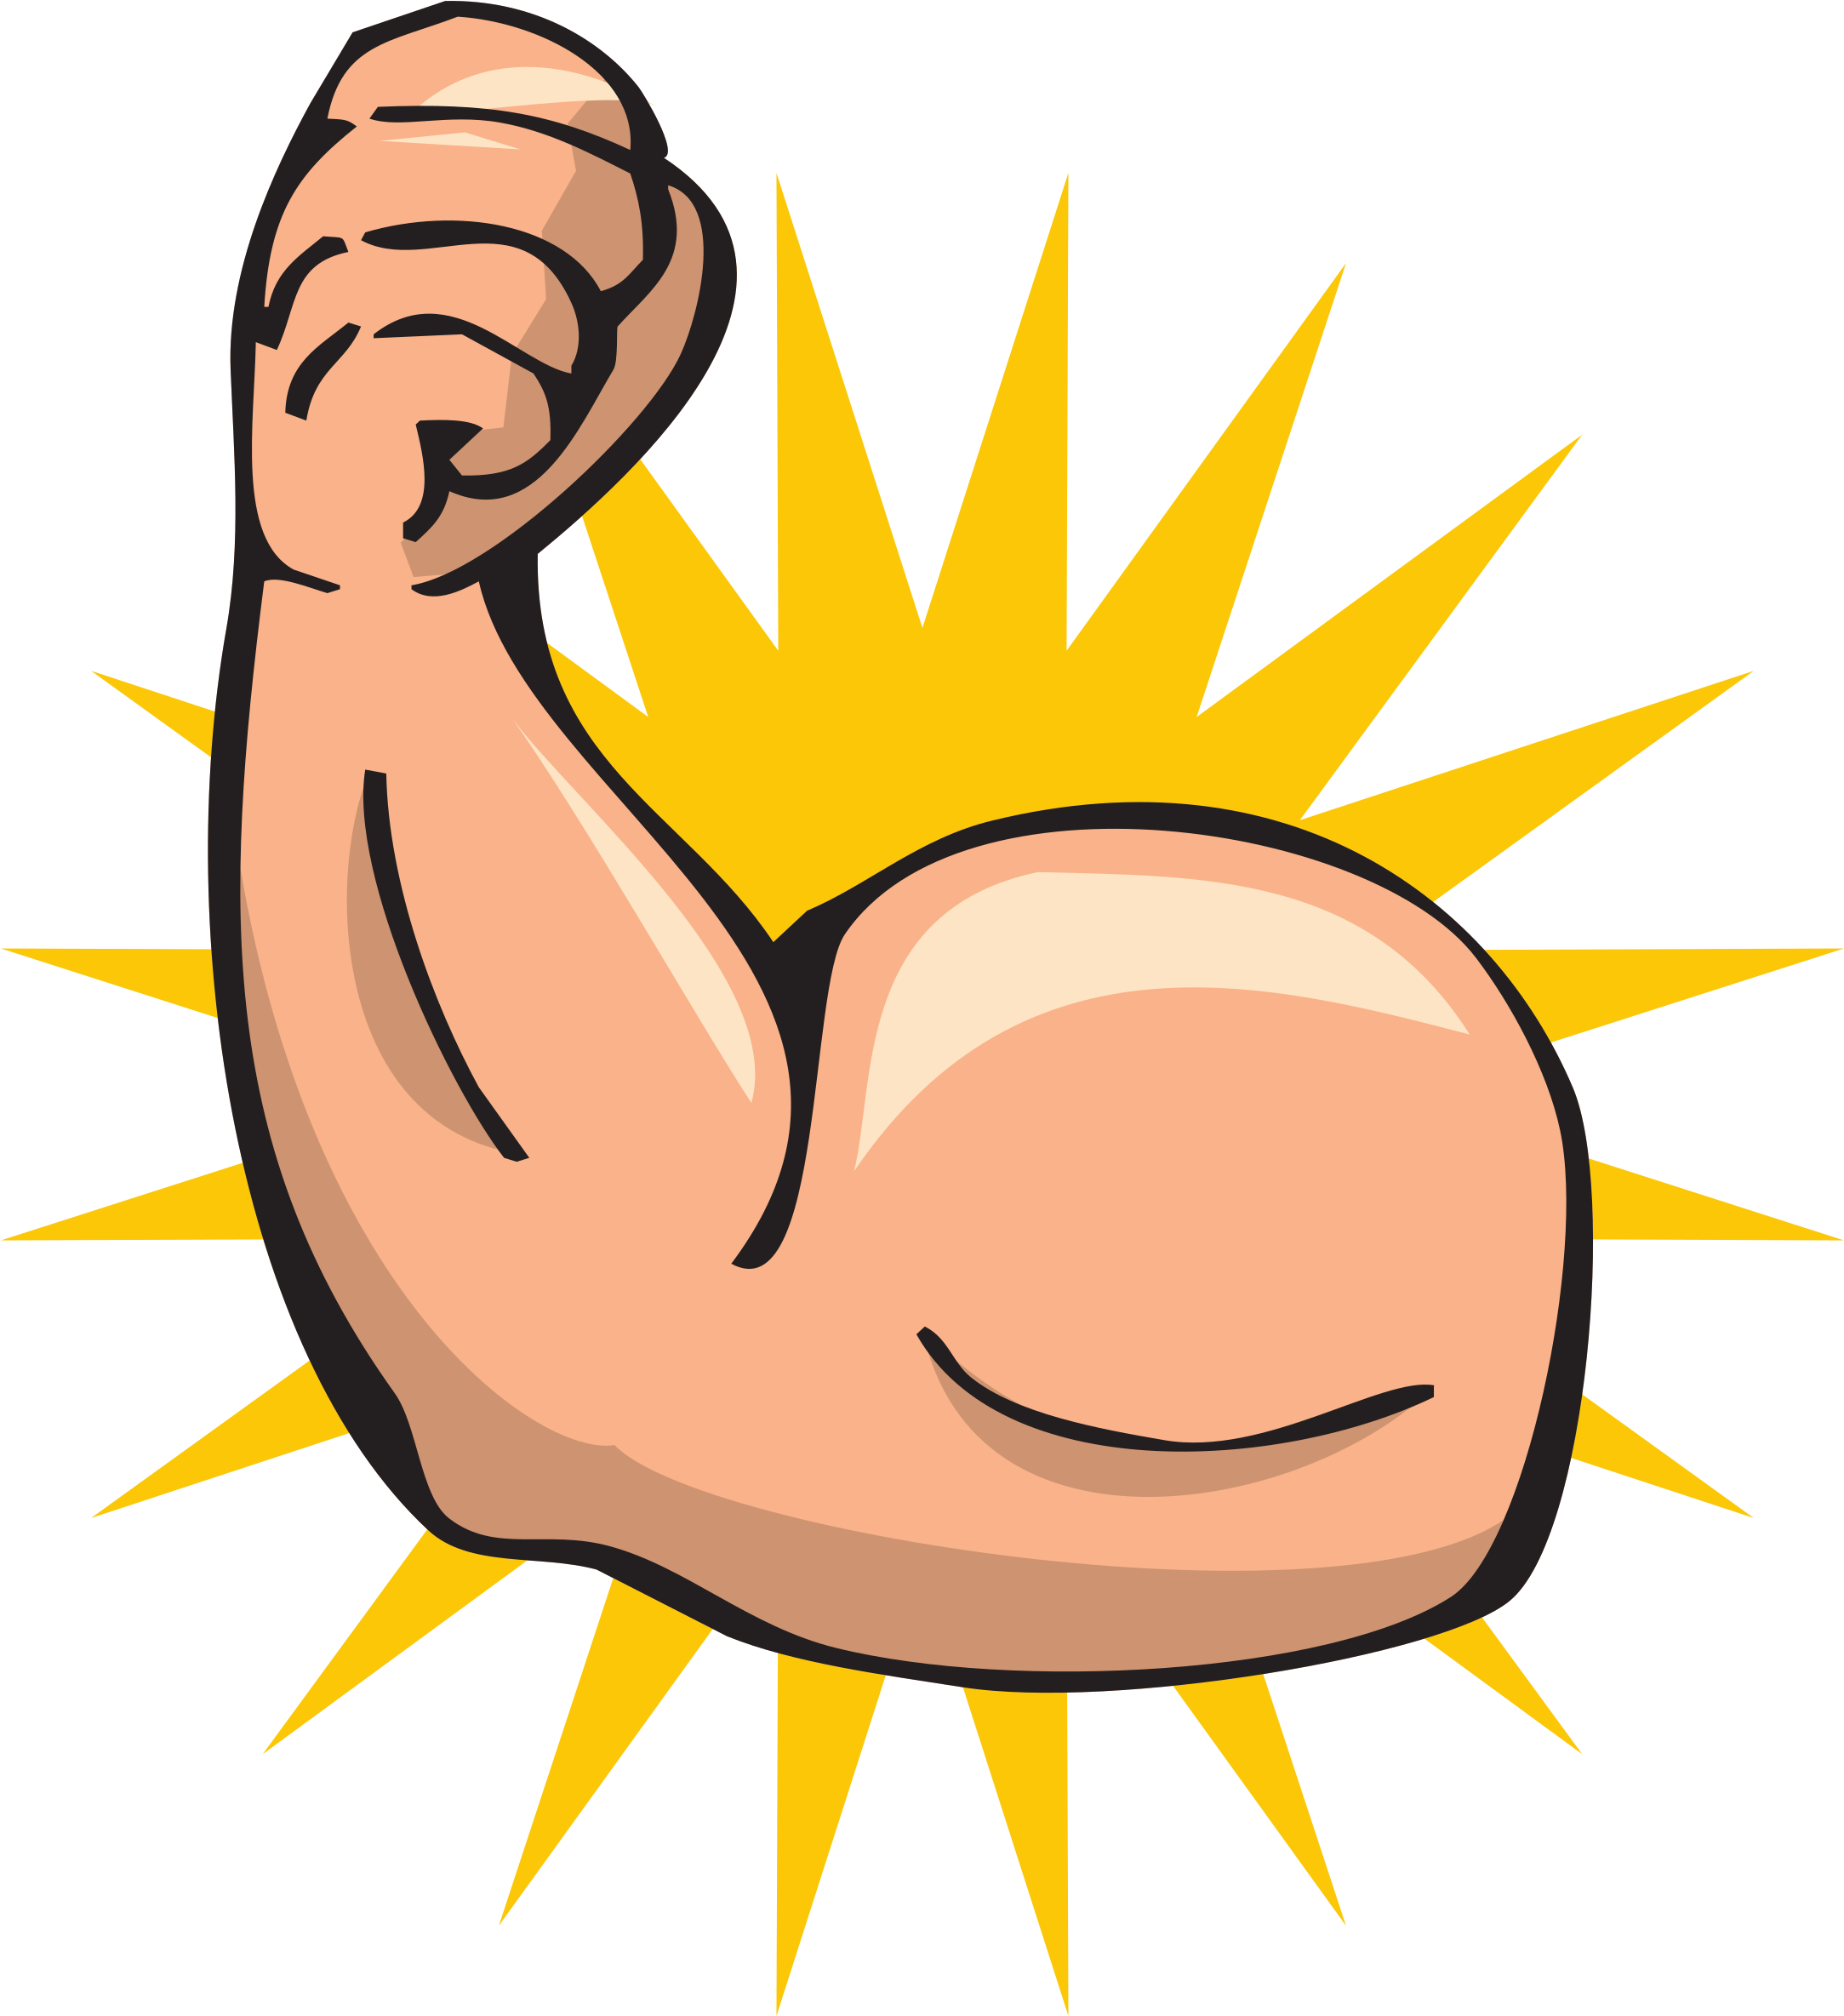 Download and share clipart about Strong Arm - Strong Arm Png, Find more hig...